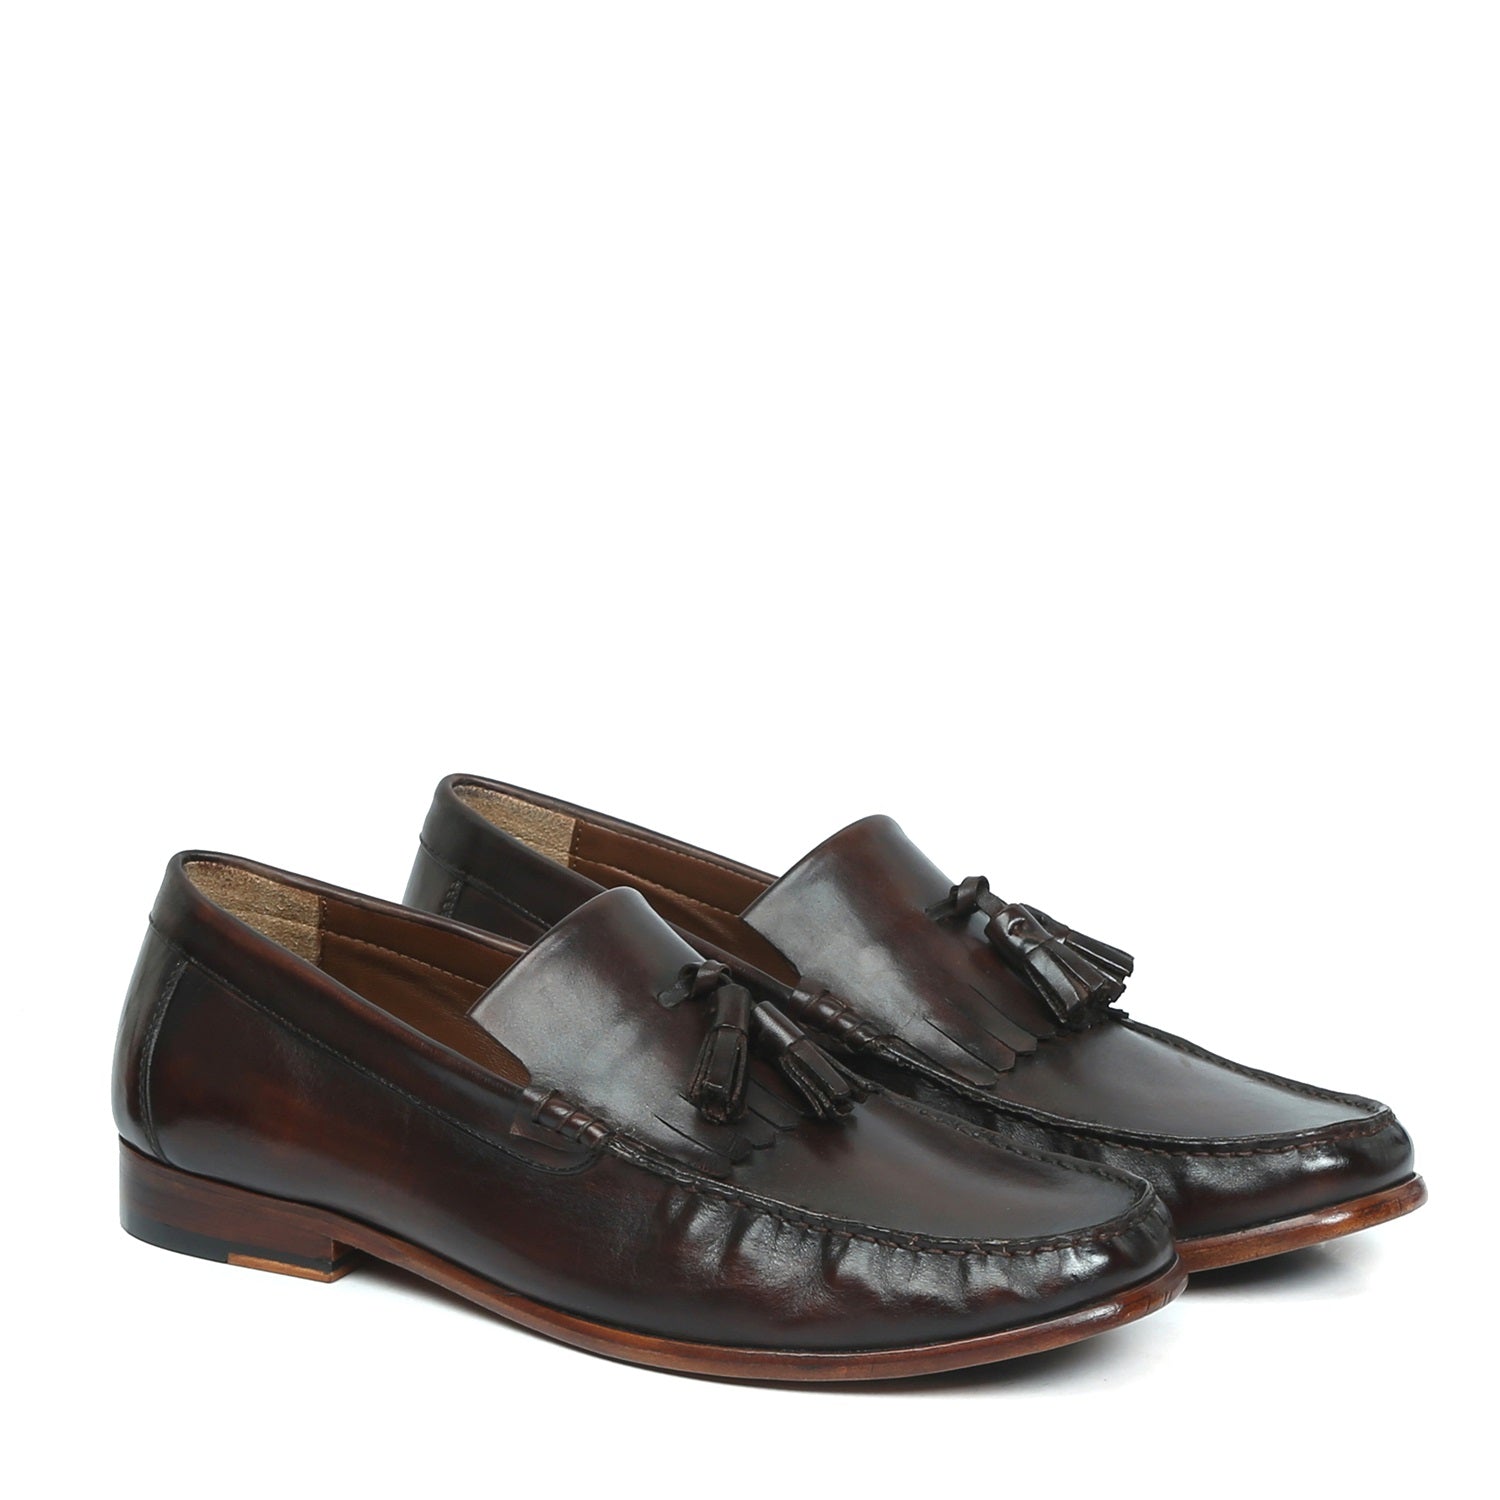 Tassel-Fringes Loafers in Dark Brown Leather with Leather Sole